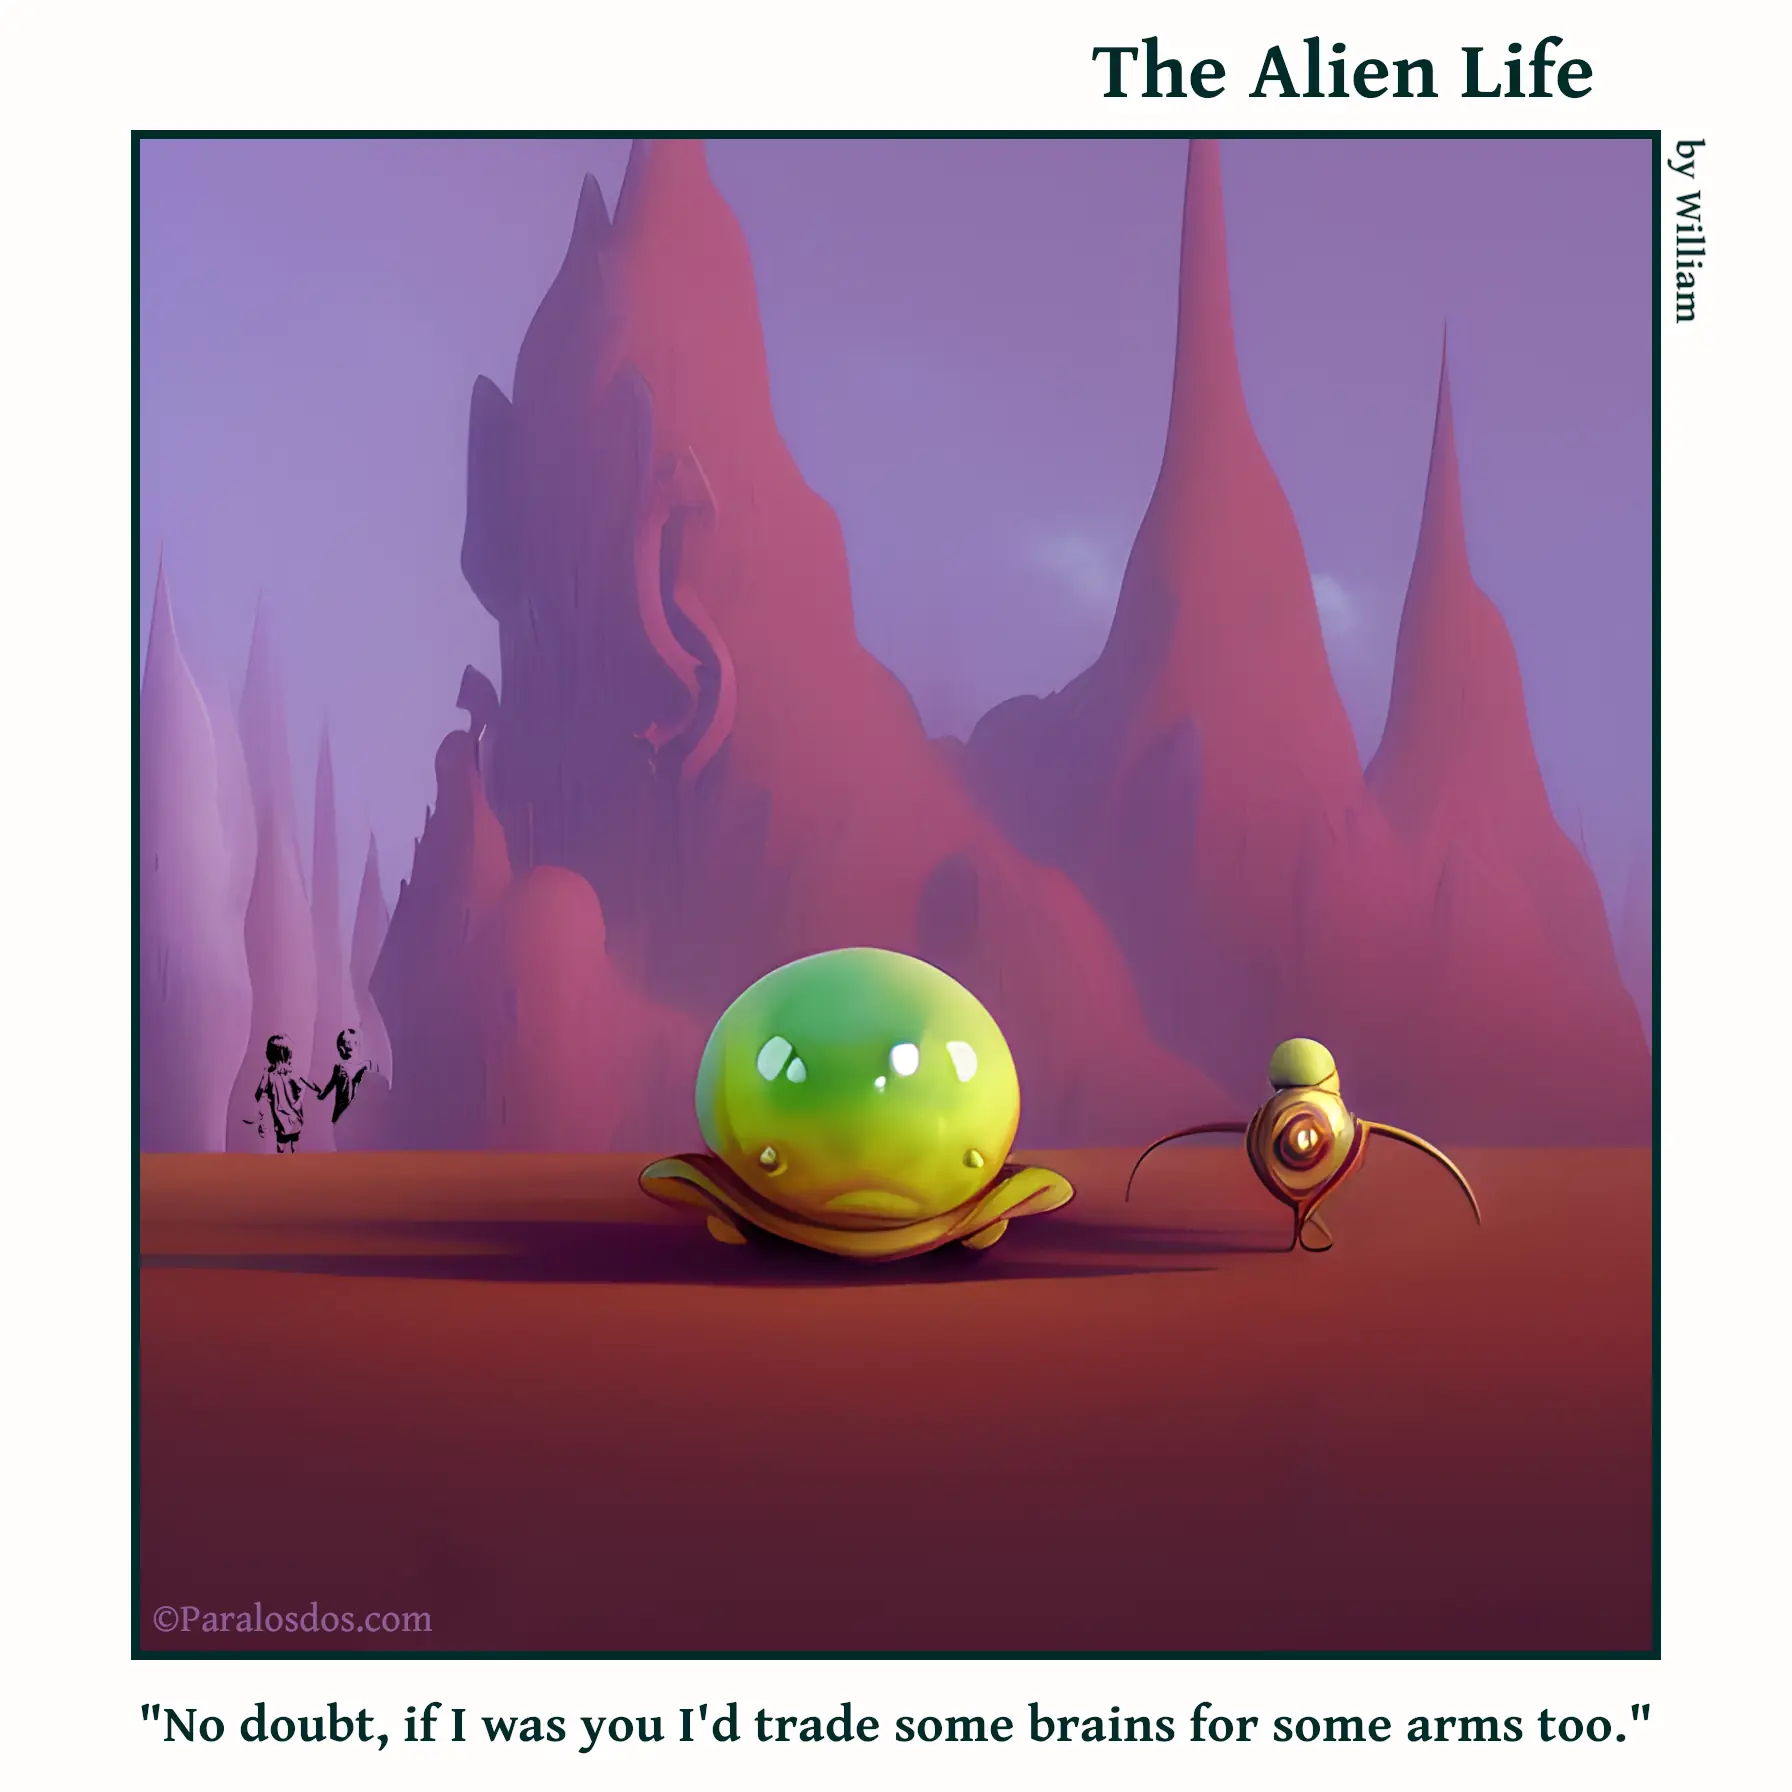 The Alien Life, one panel Comic. Two aliens are hanging out. One looks like a bird, the other is a big brain with no arms. The caption reads: "No doubt, if I was you I'd trade some brains for some arms too."